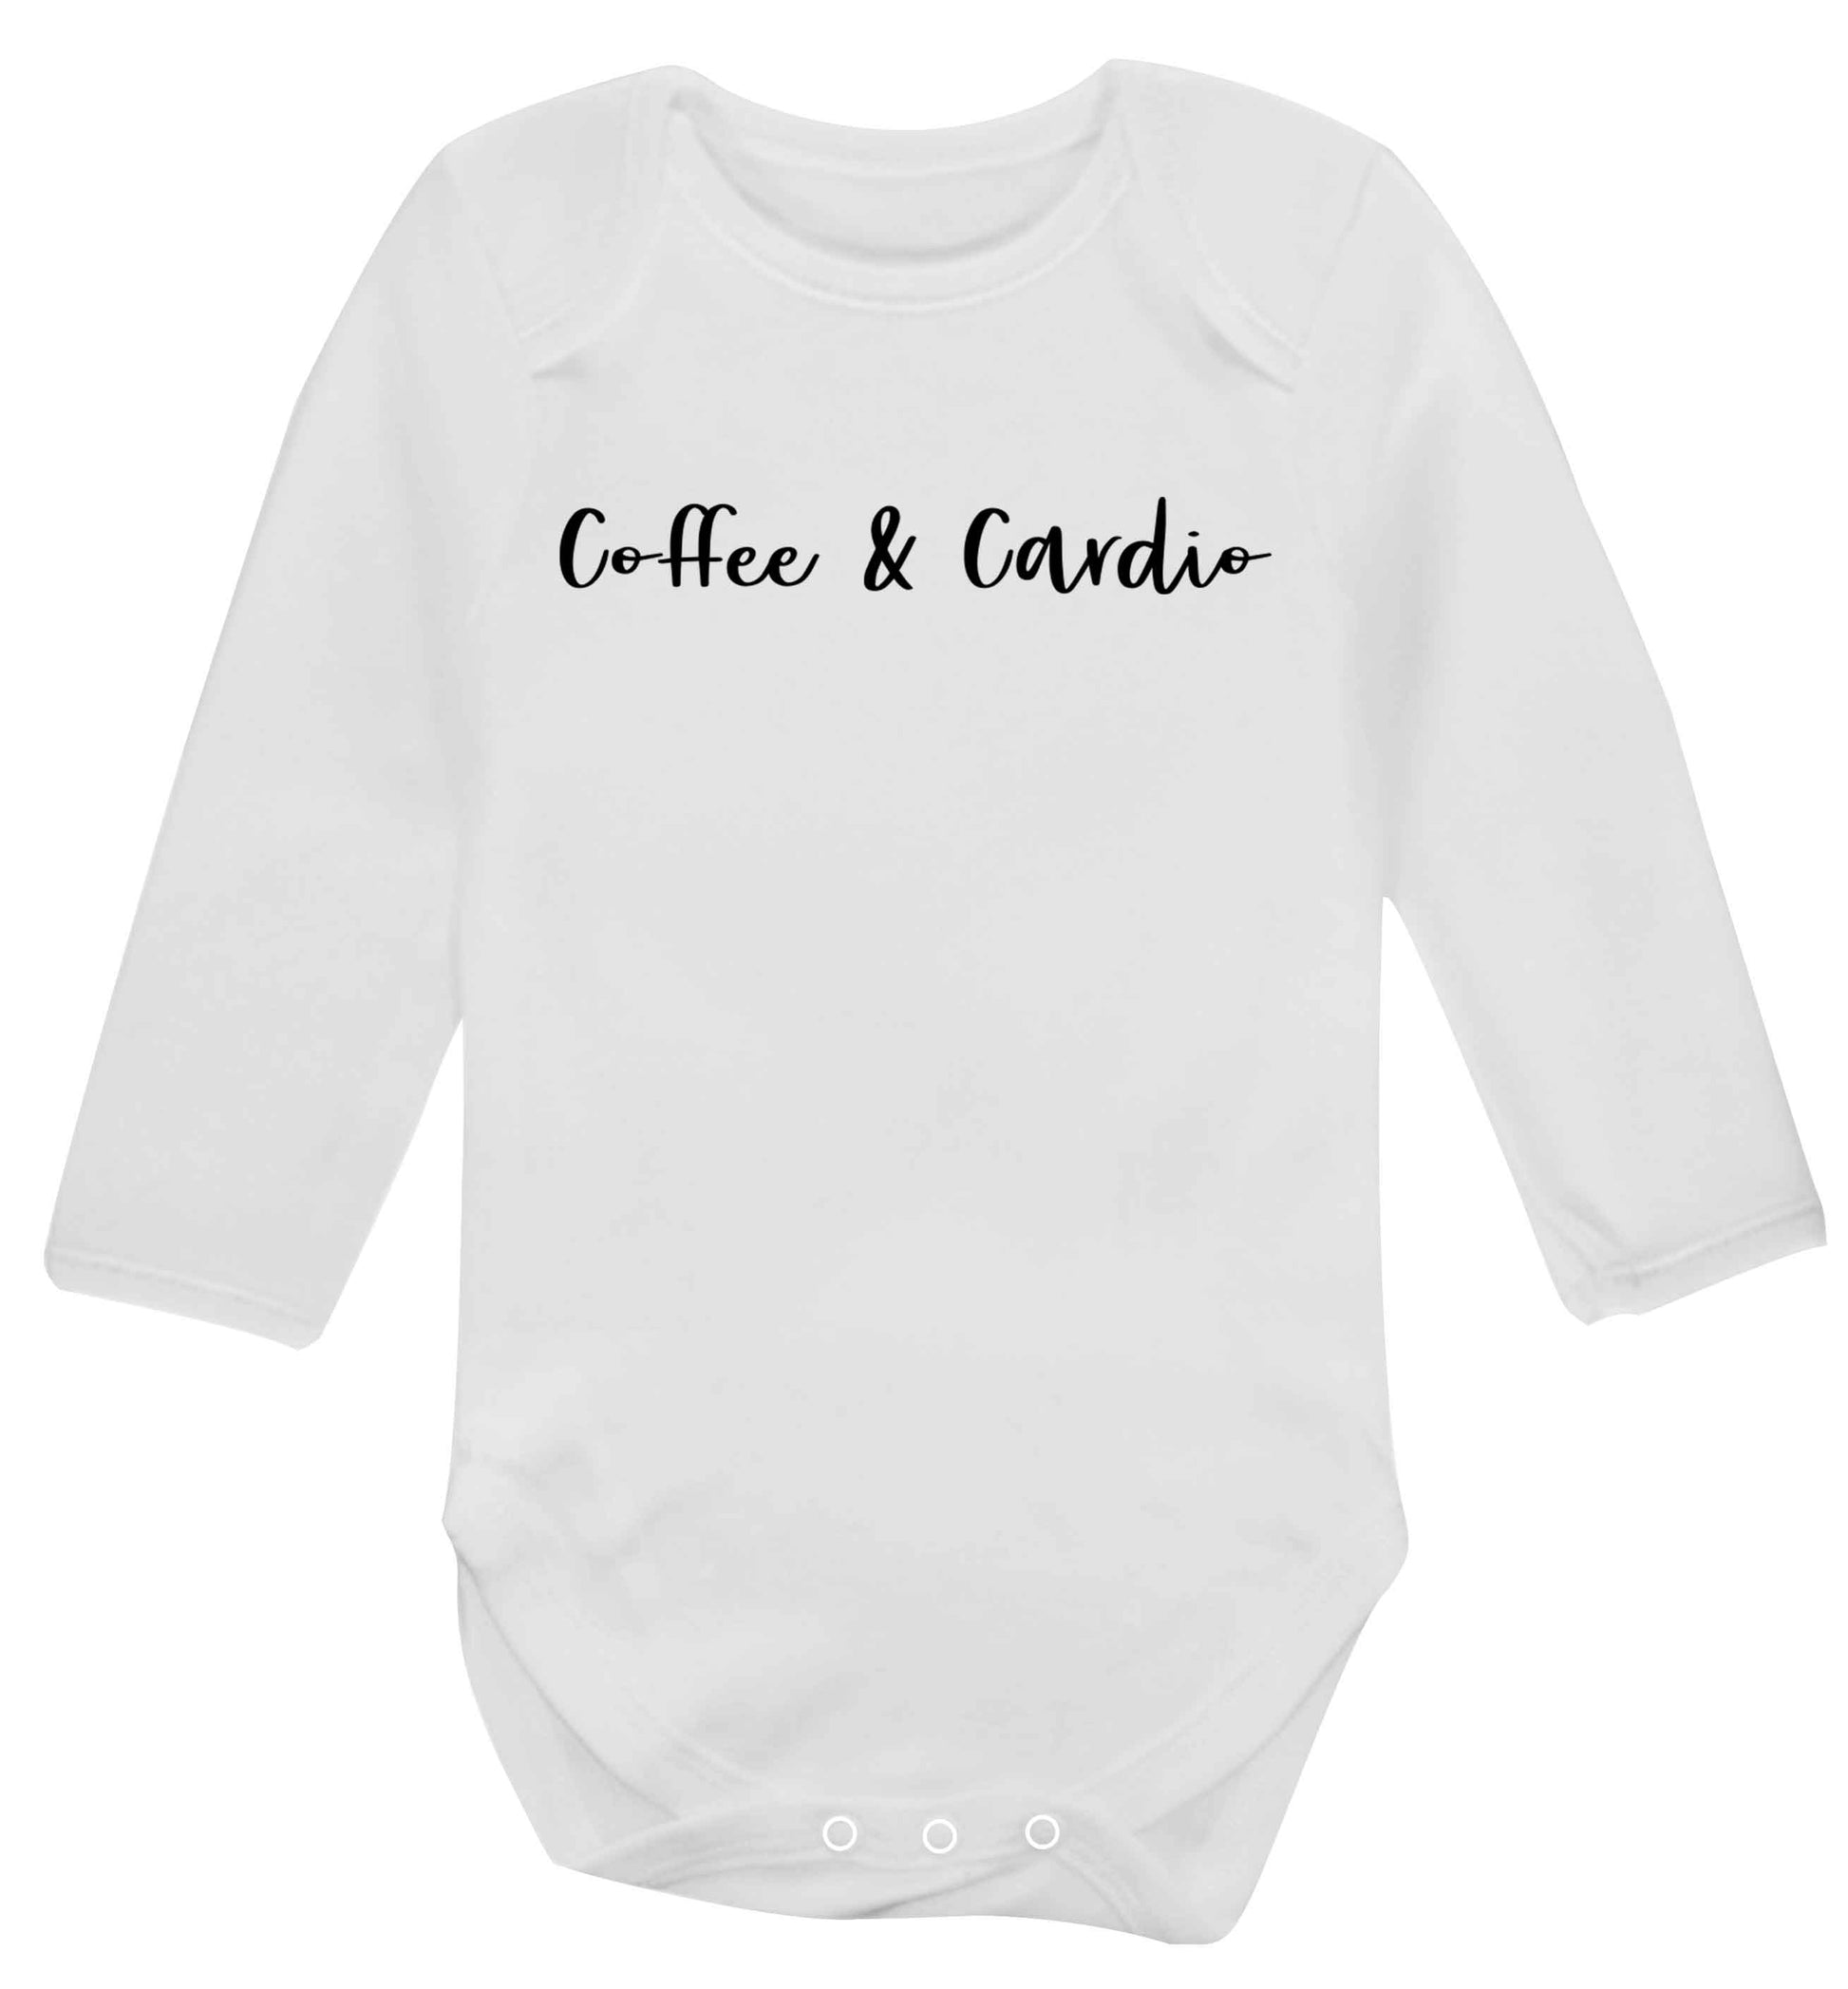 Coffee and cardio Baby Vest long sleeved white 6-12 months